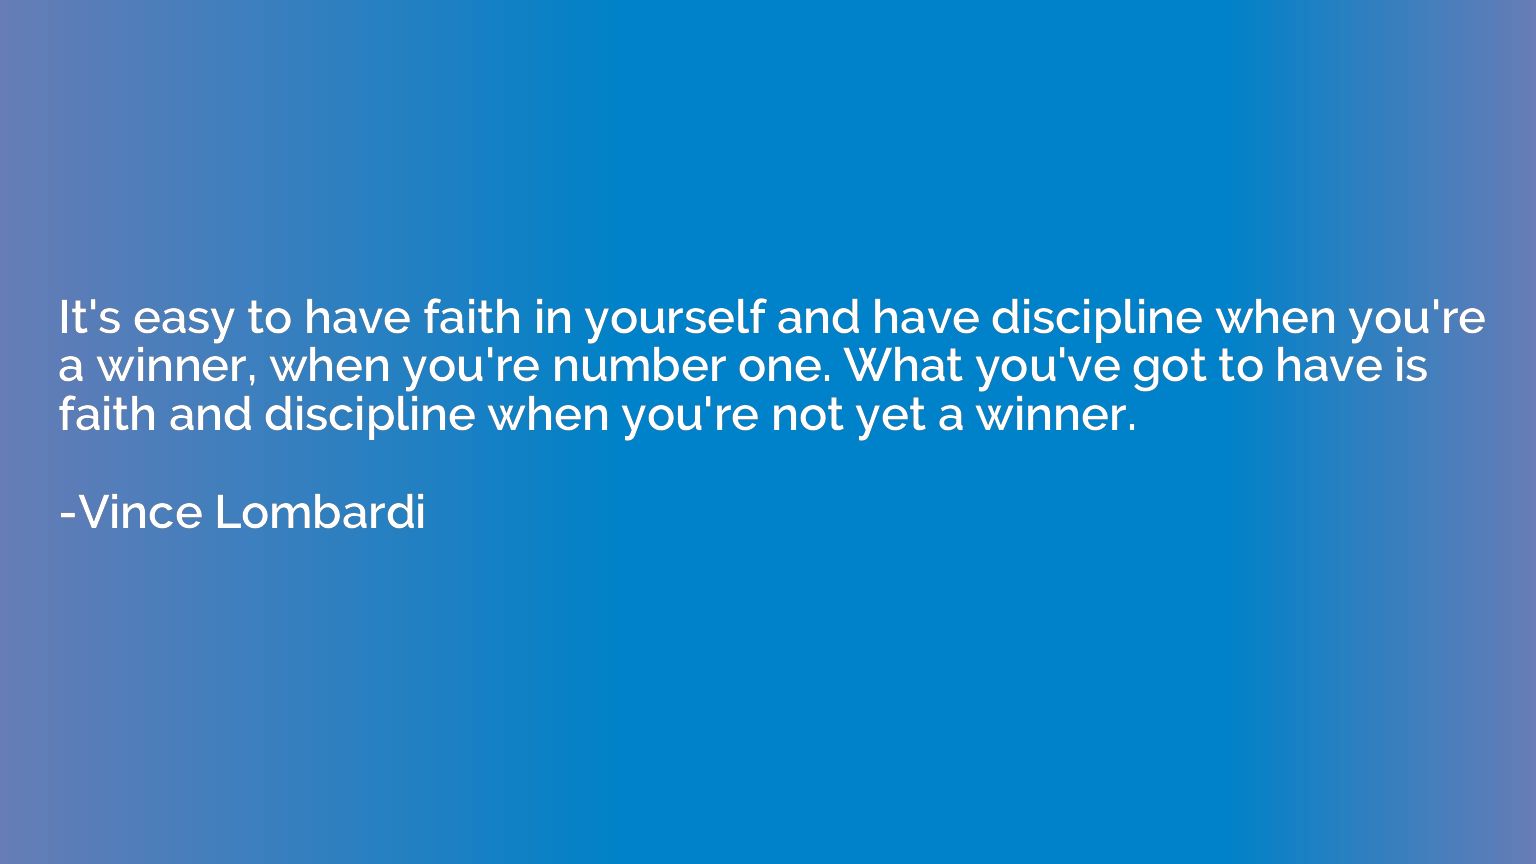 It's easy to have faith in yourself and have discipline when